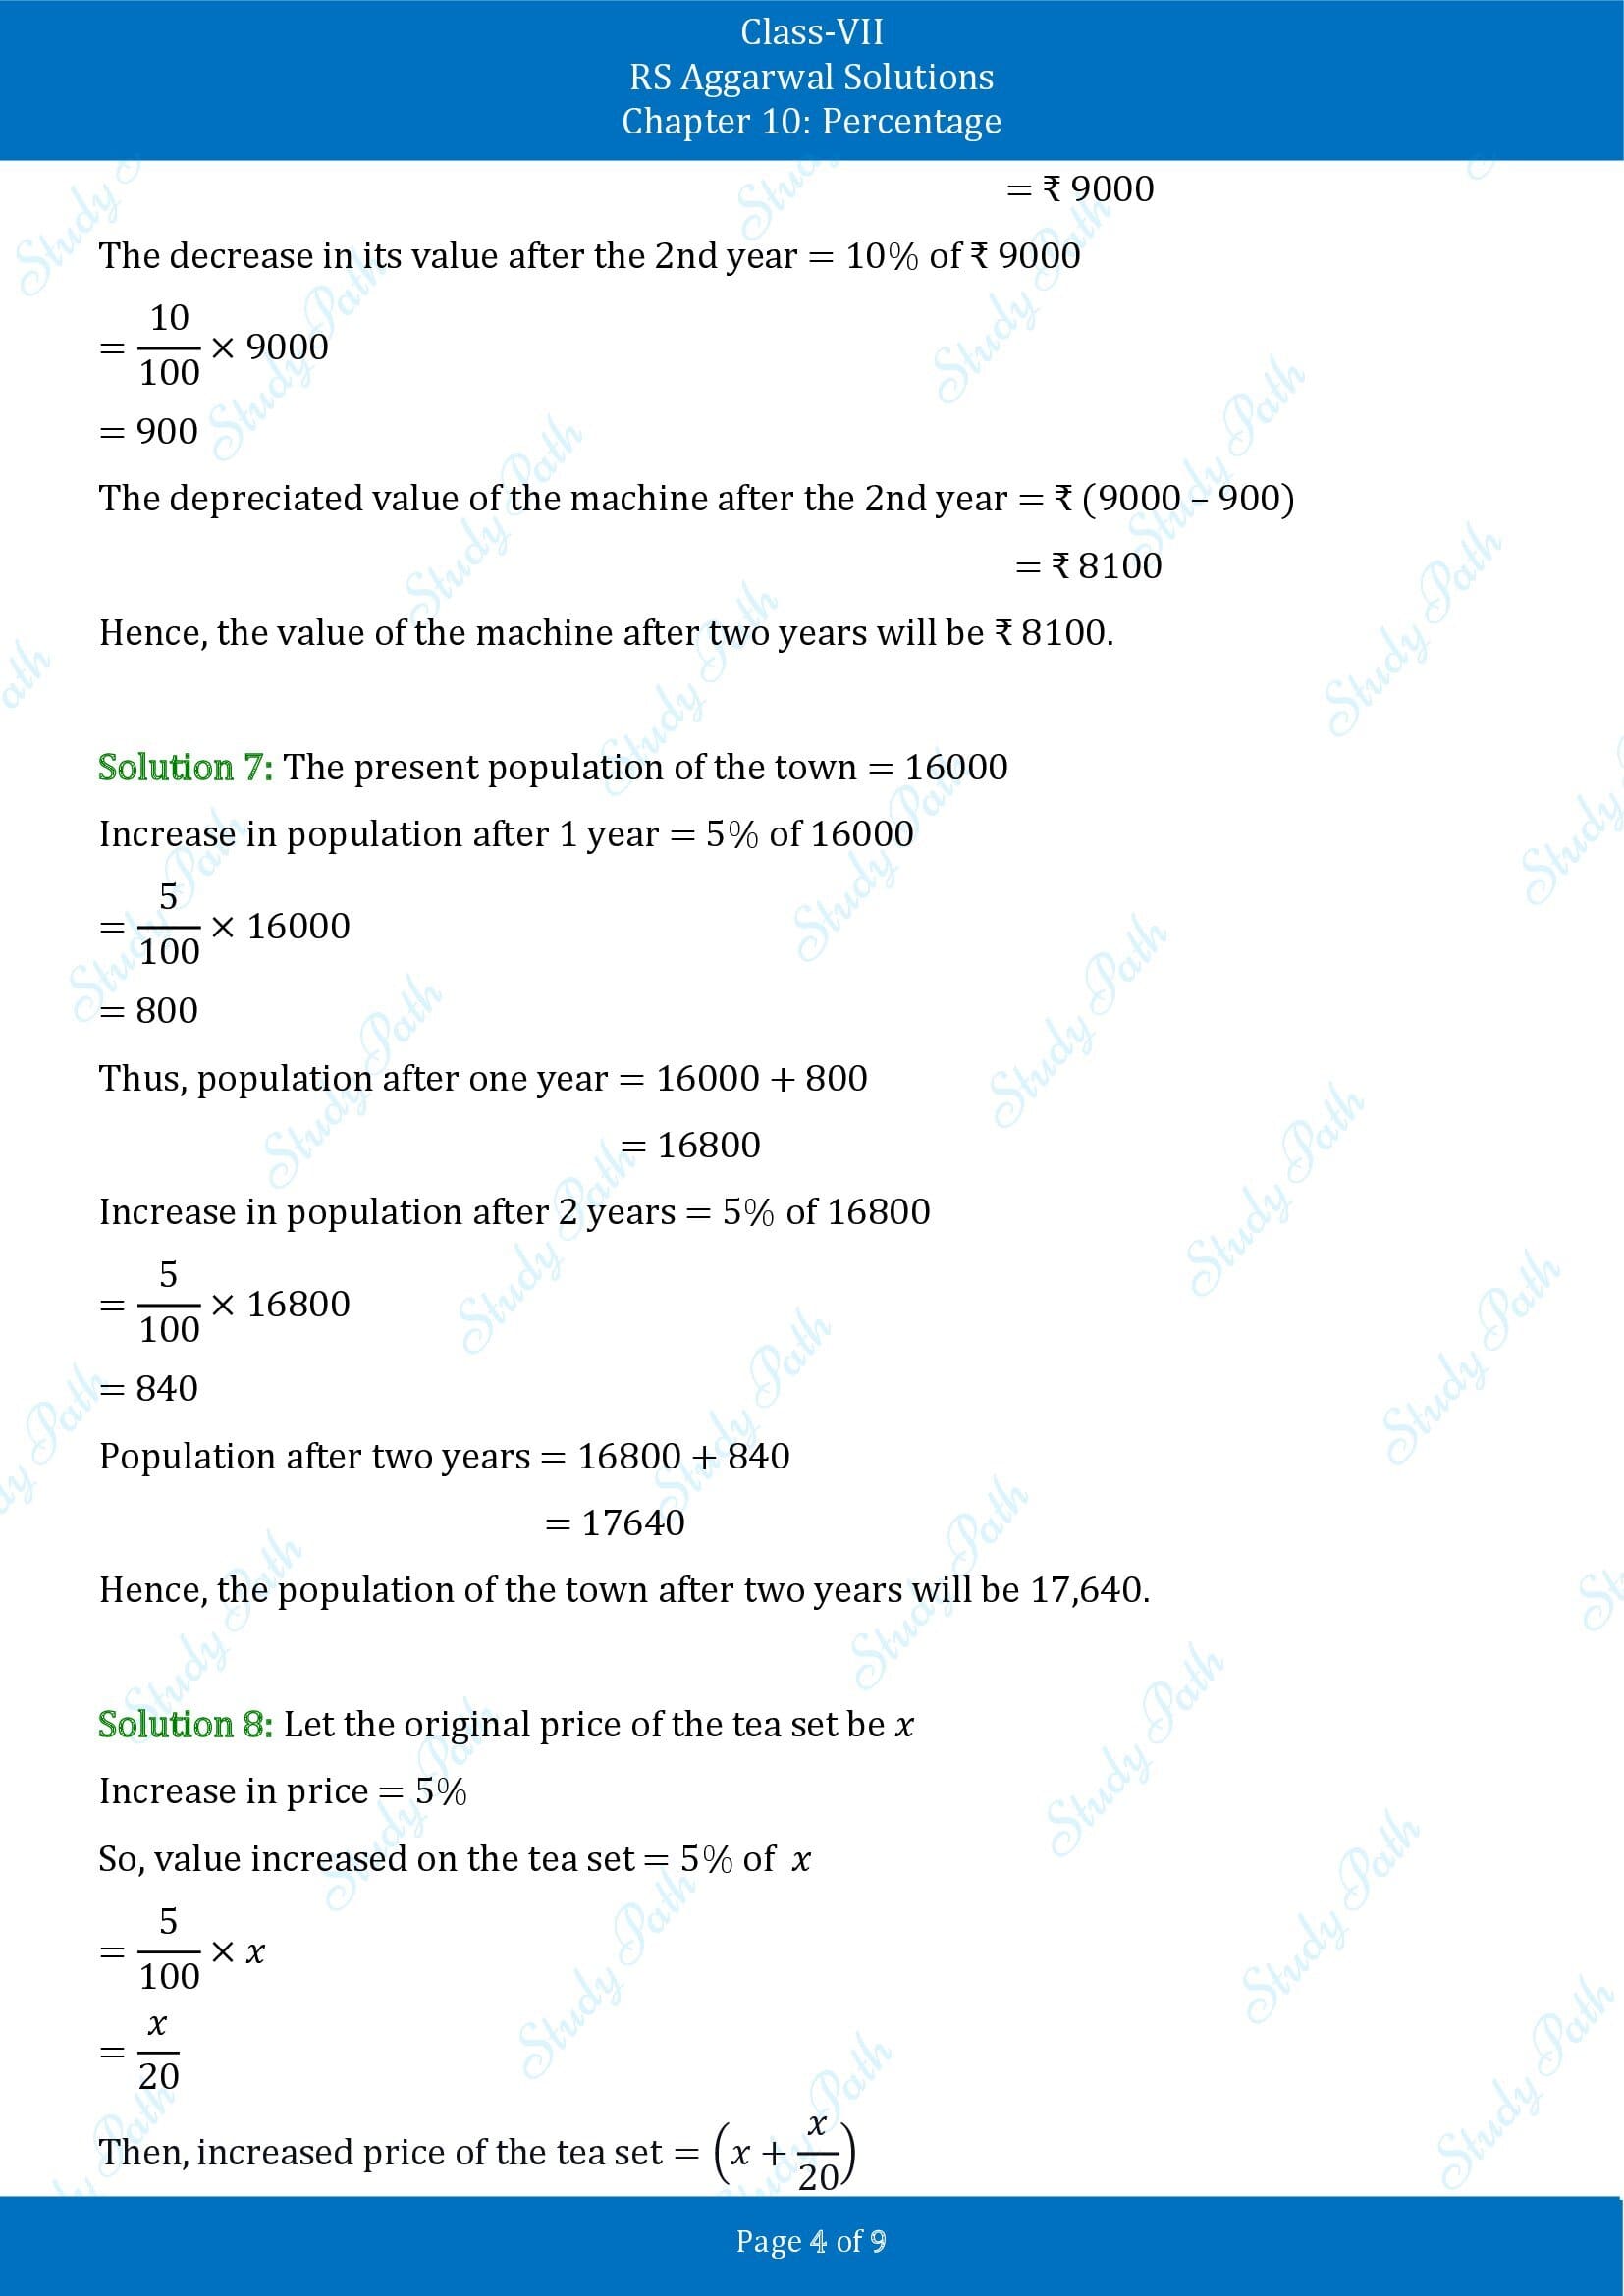 RS Aggarwal Solutions Class 7 Chapter 10 Percentage Test Paper 00004